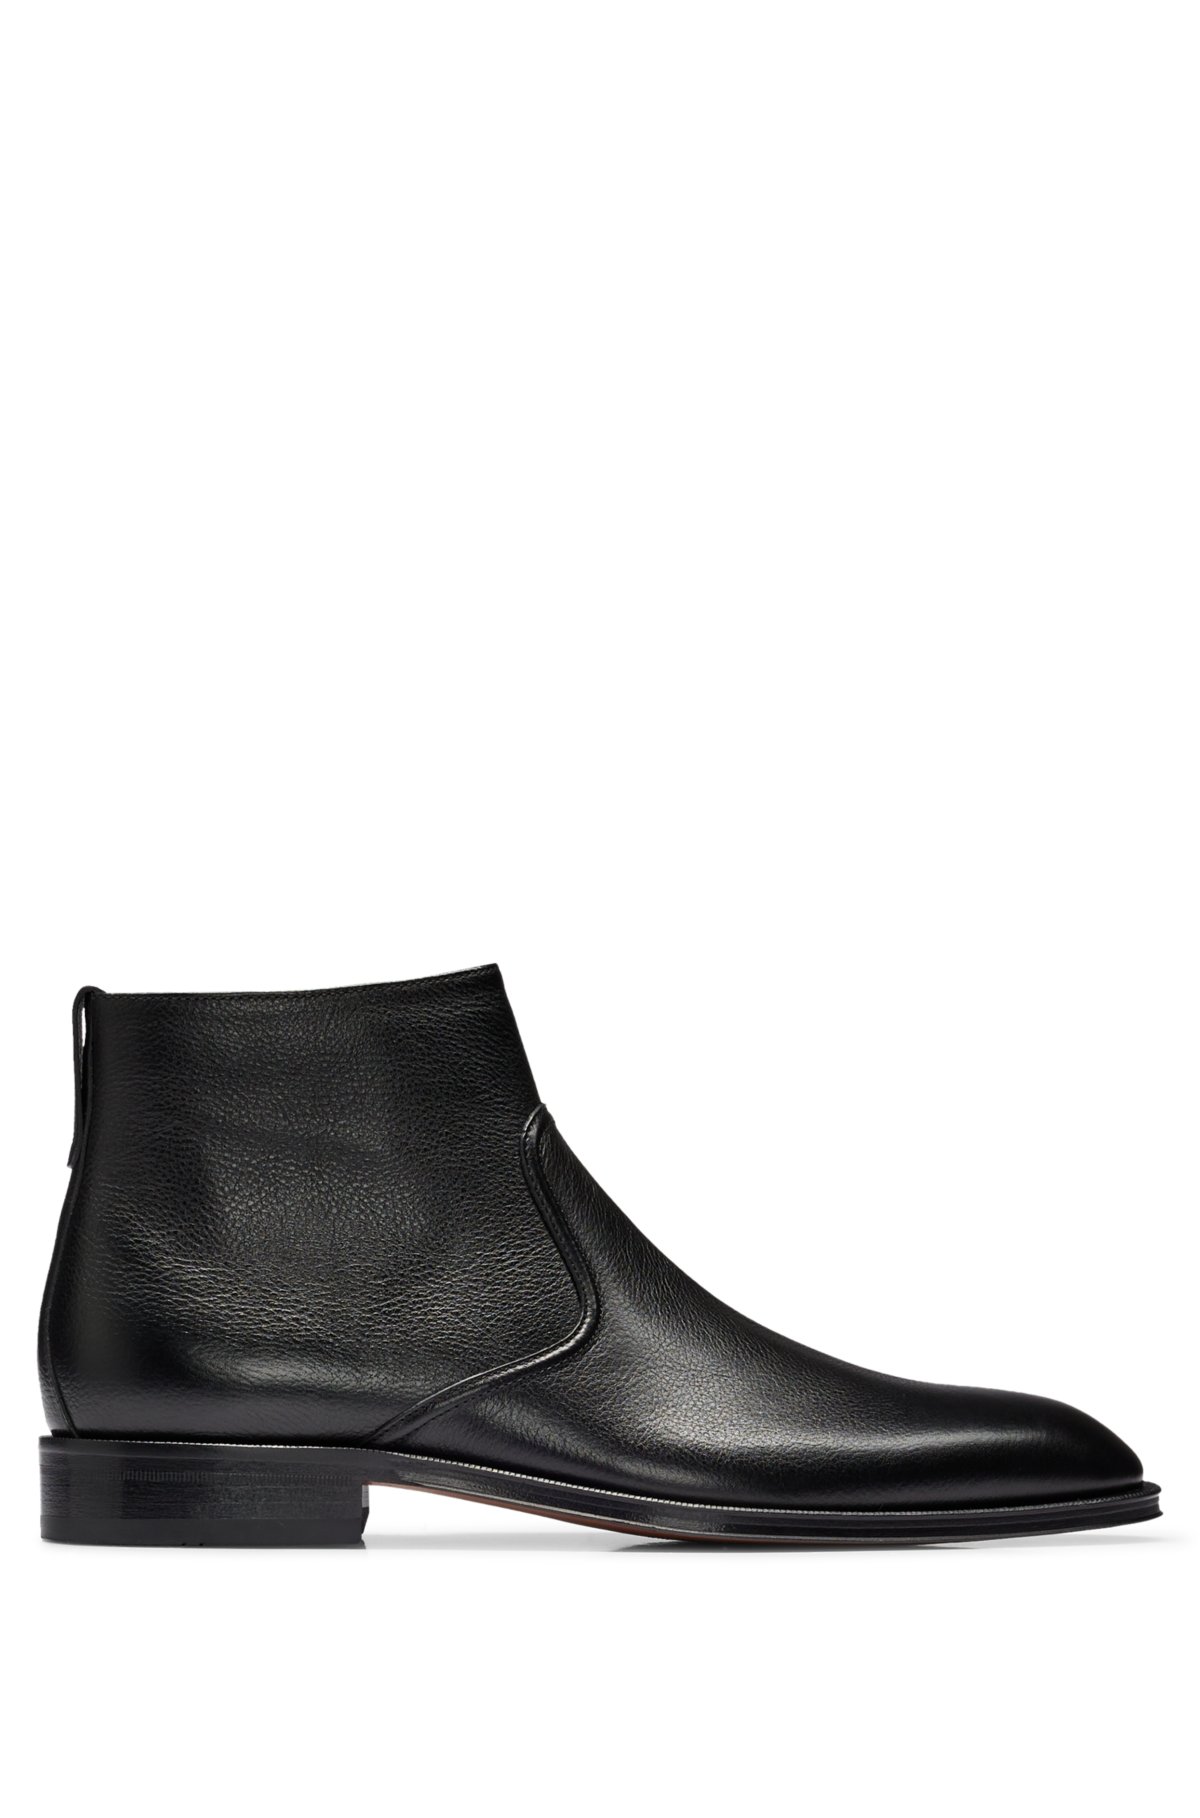 Grained-leather zip boots with branded trims, Black